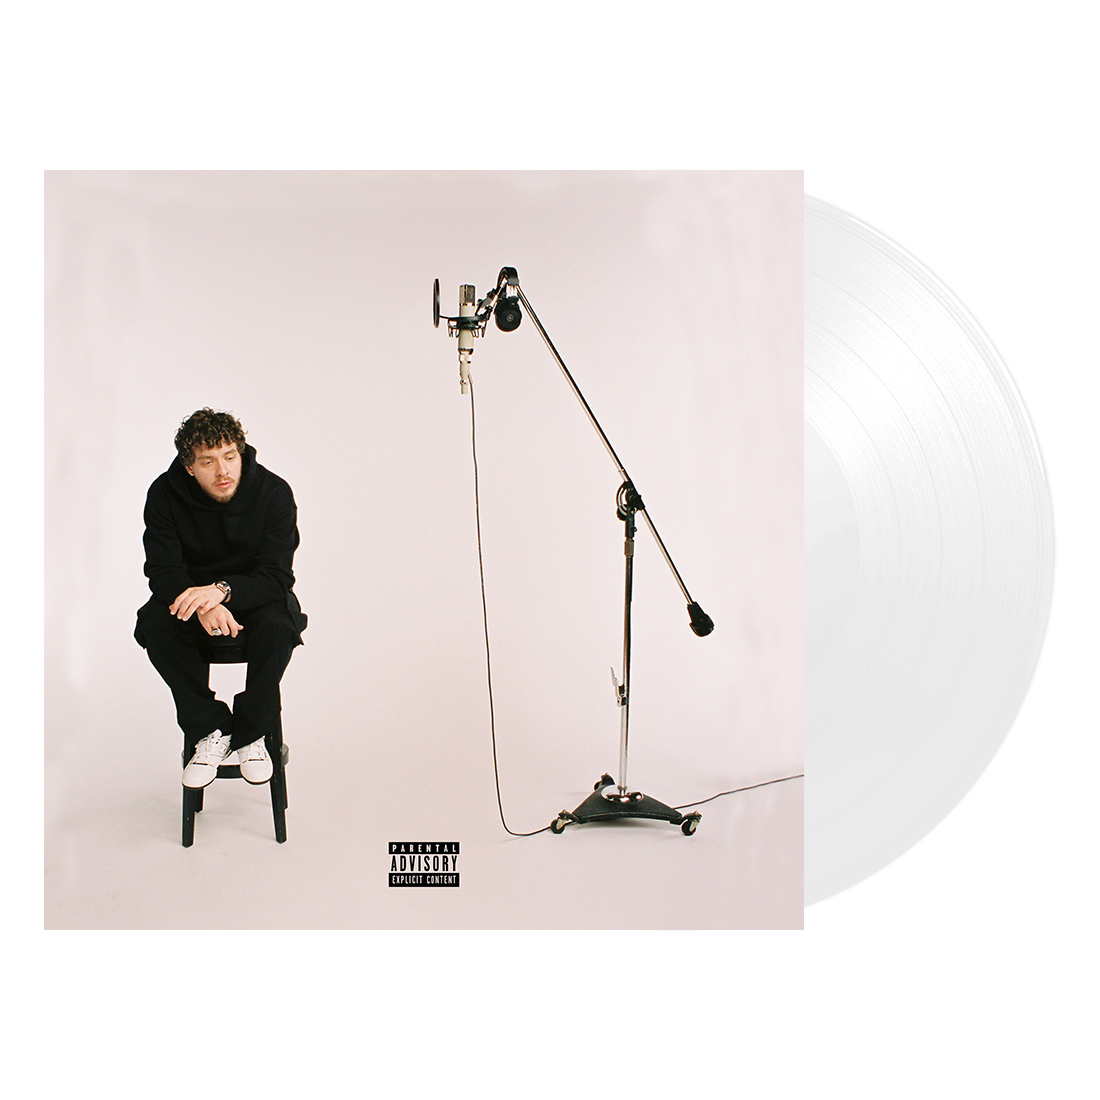 Jack Harlow - Come Home The Kids Miss You (Vinyl)